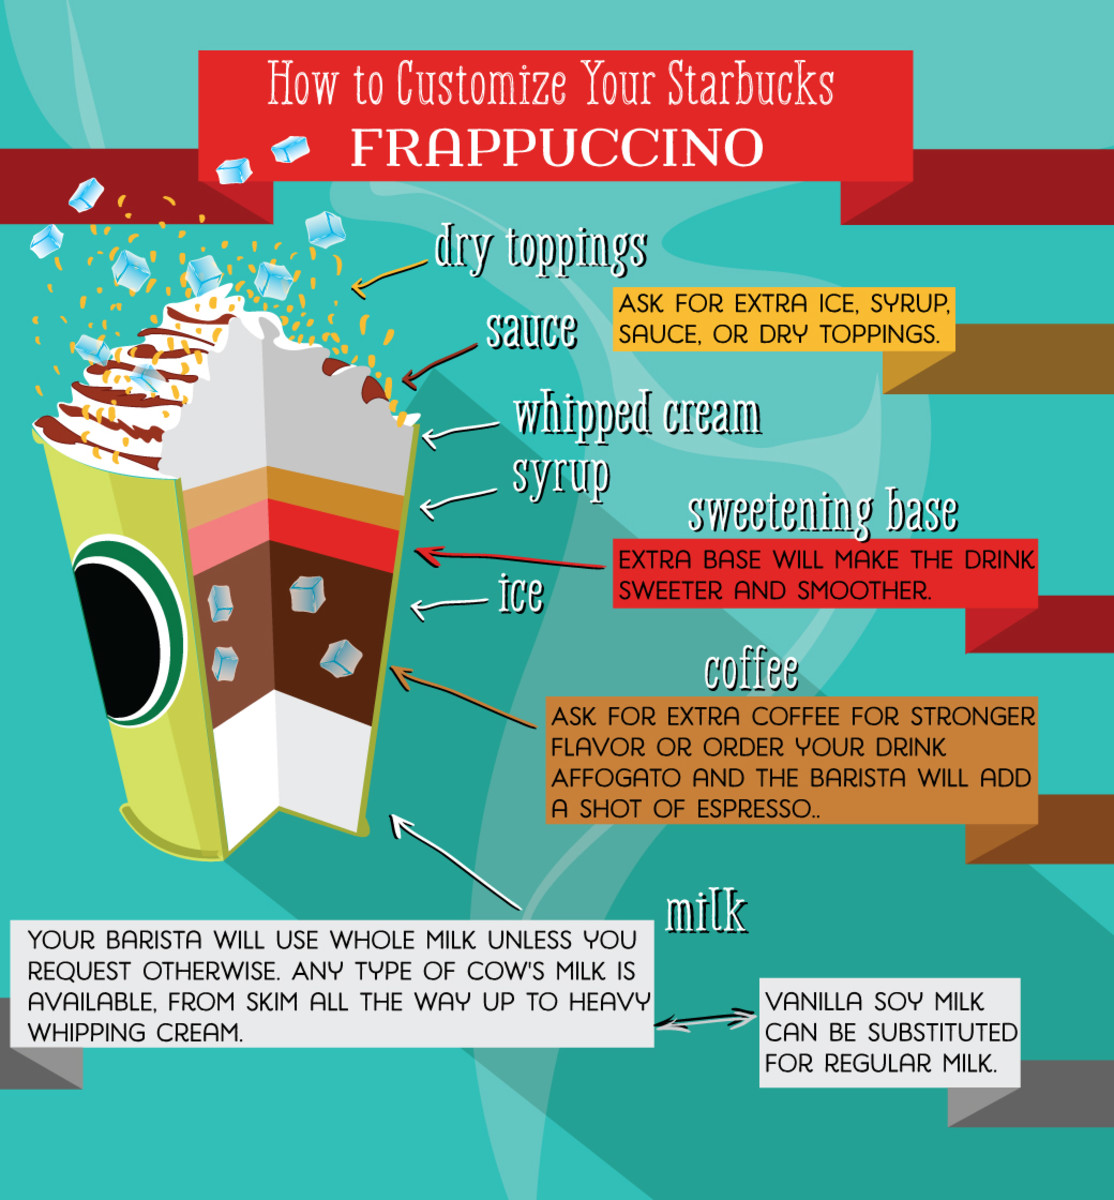 Frappe Training Guide